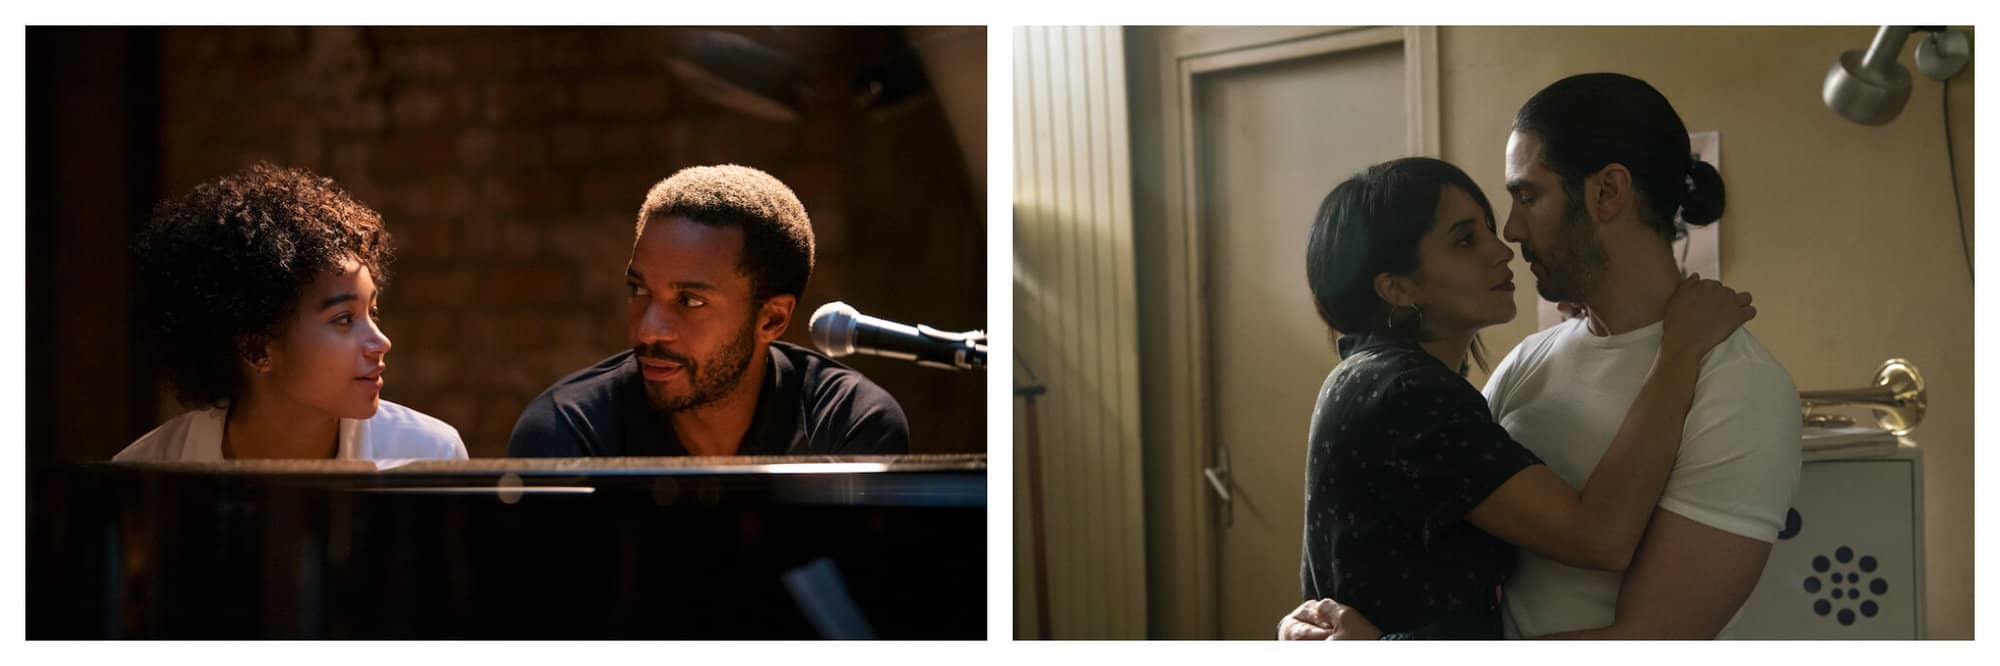 Left: a man and a woman sitting in front of a piano and speaking with one another. There is a microphone to the right. Right: a man and a woman hugging one another. There is a trumpet visible to the right. Both images are from "The Eddy" Netflix series